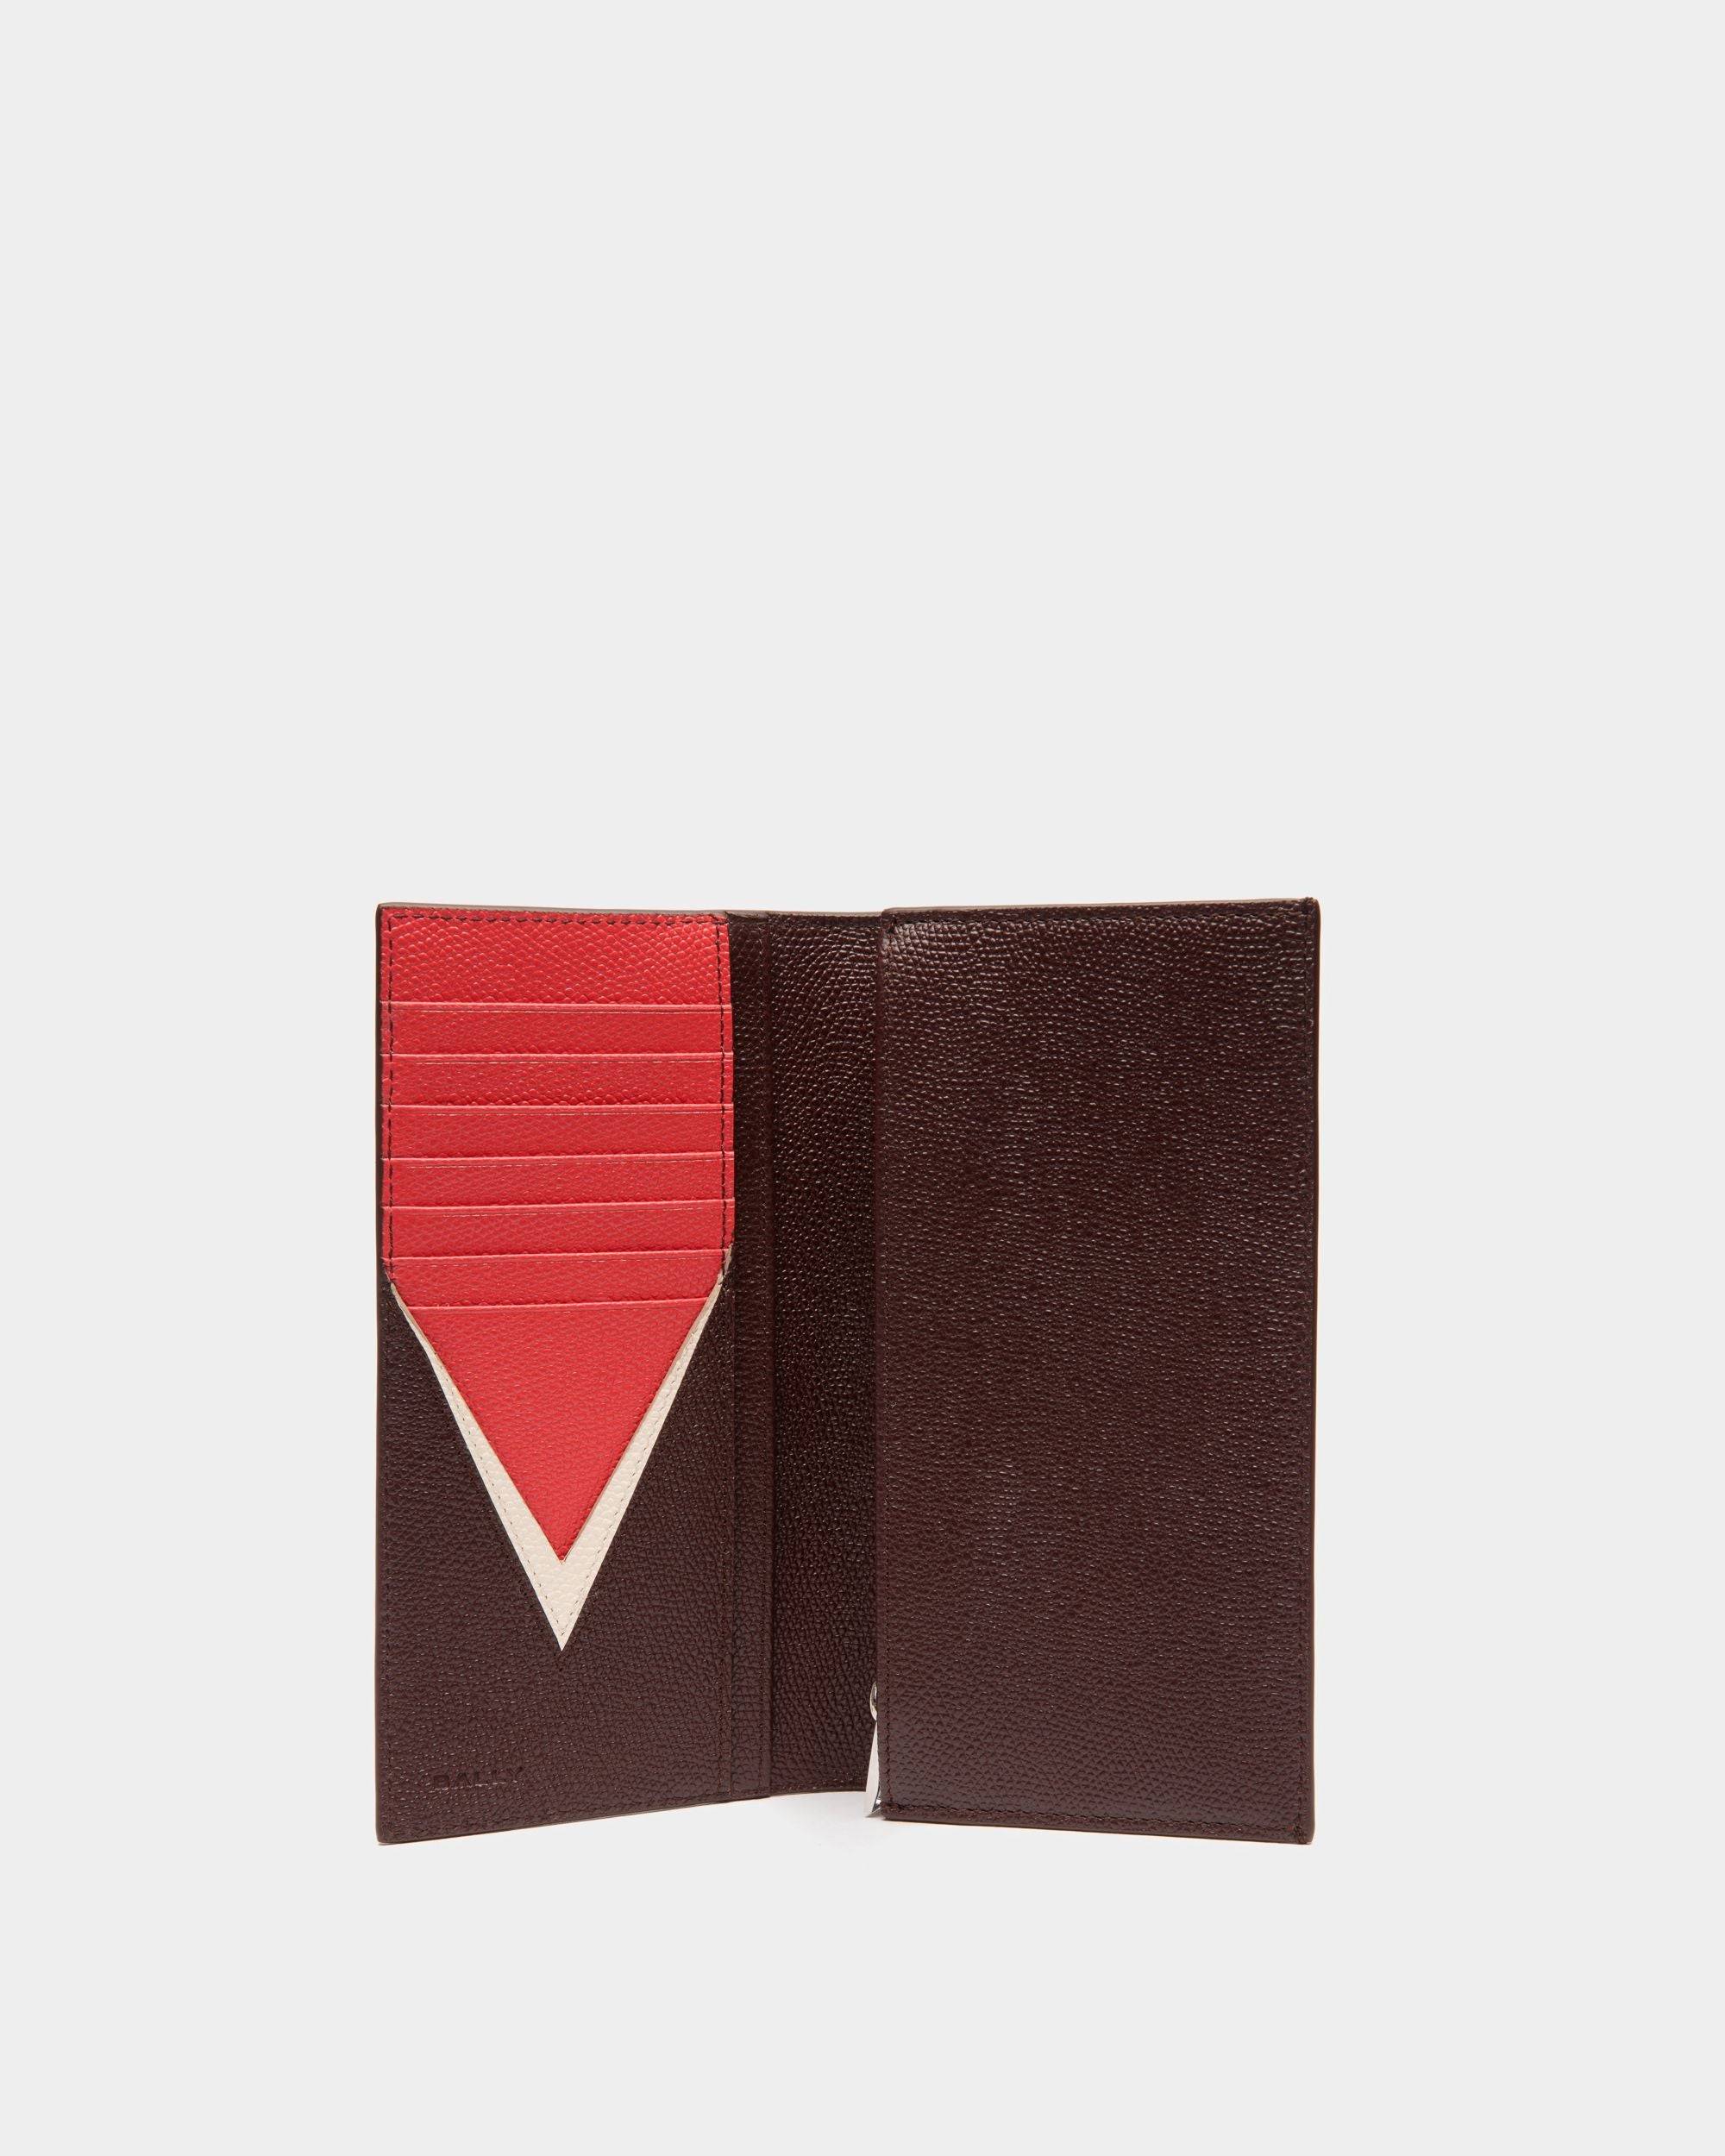 Flag | Men's Continental Wallet in Chestnut Brown Grained Leather | Bally | Still Life Open / Inside